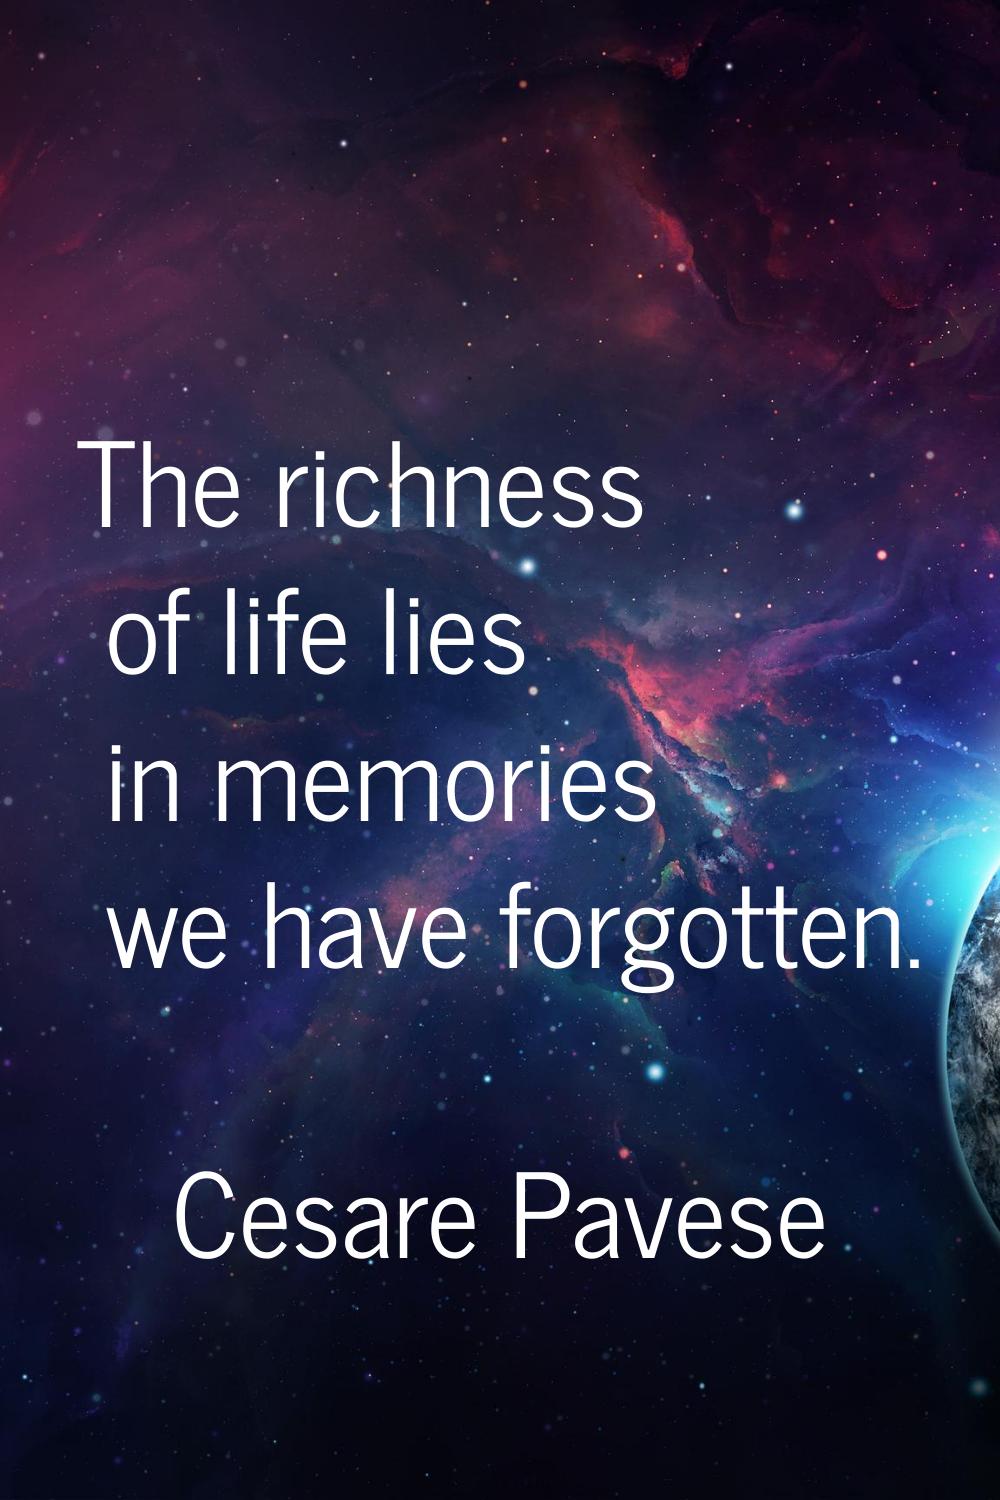 The richness of life lies in memories we have forgotten.